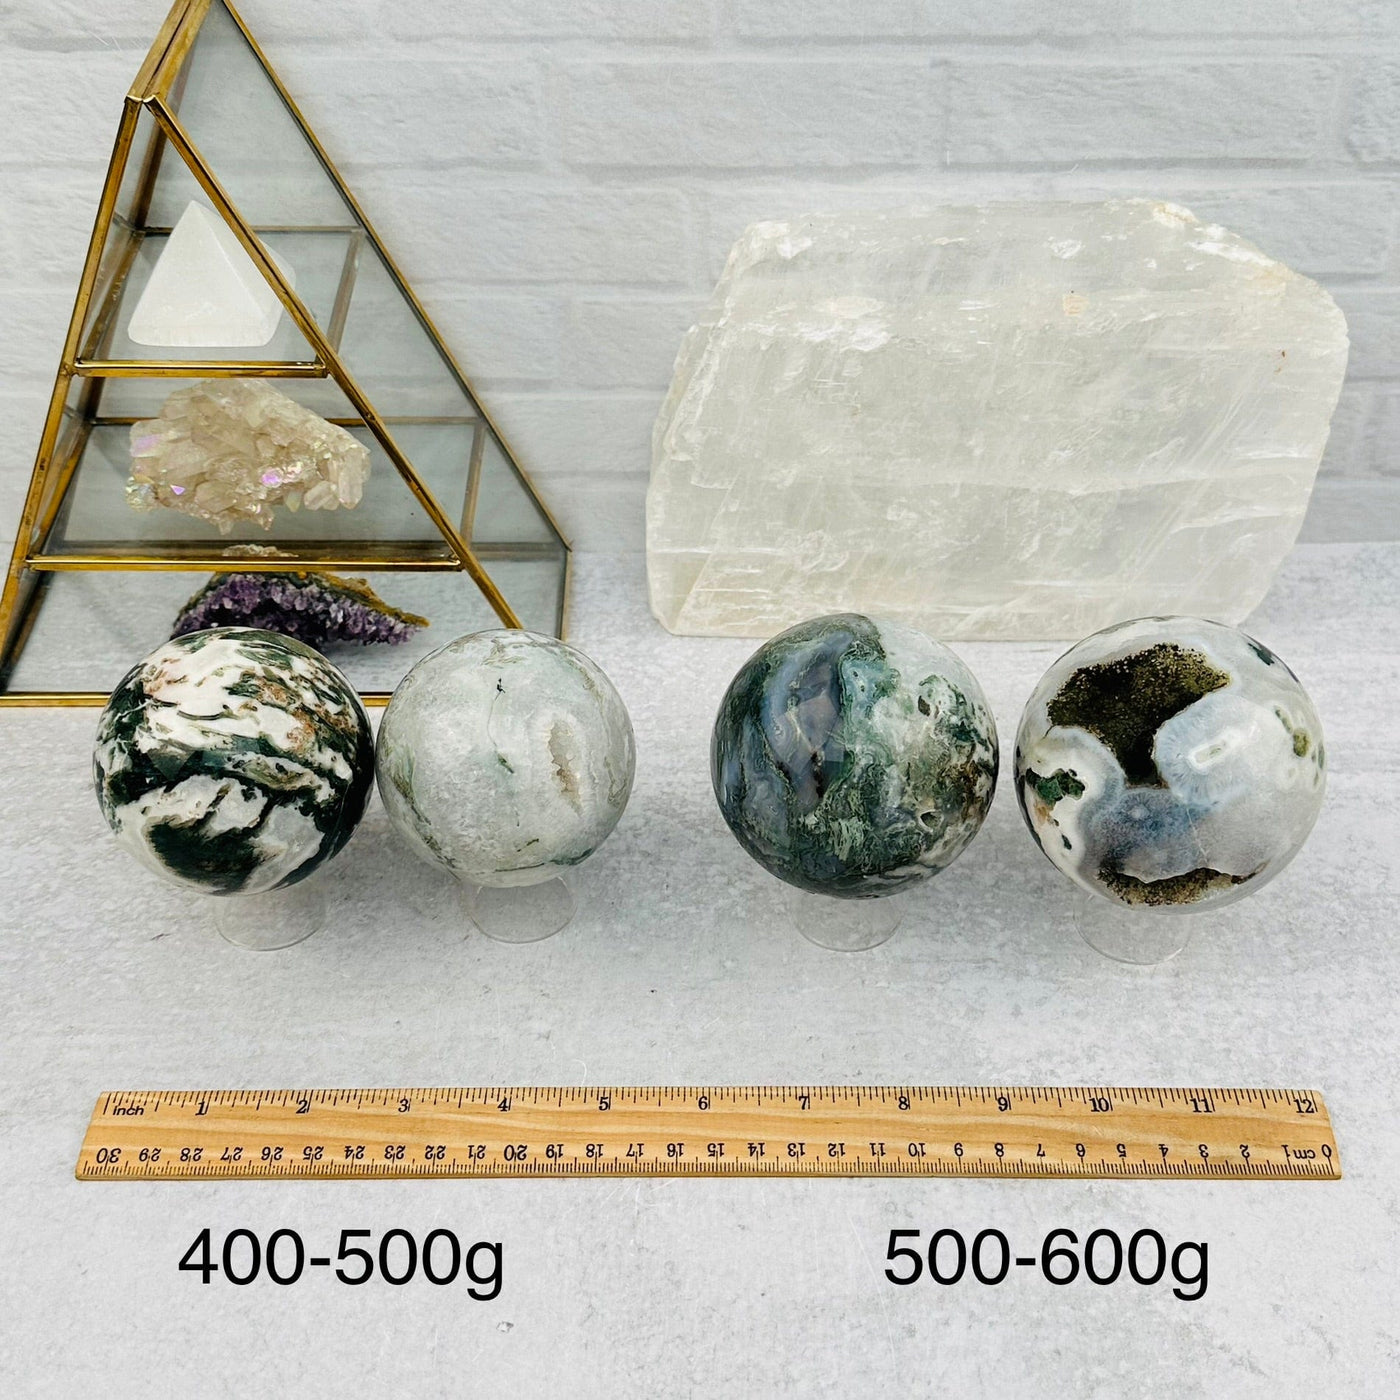 Moss Agate Spheres - By Weight - next to a ruler for size reference